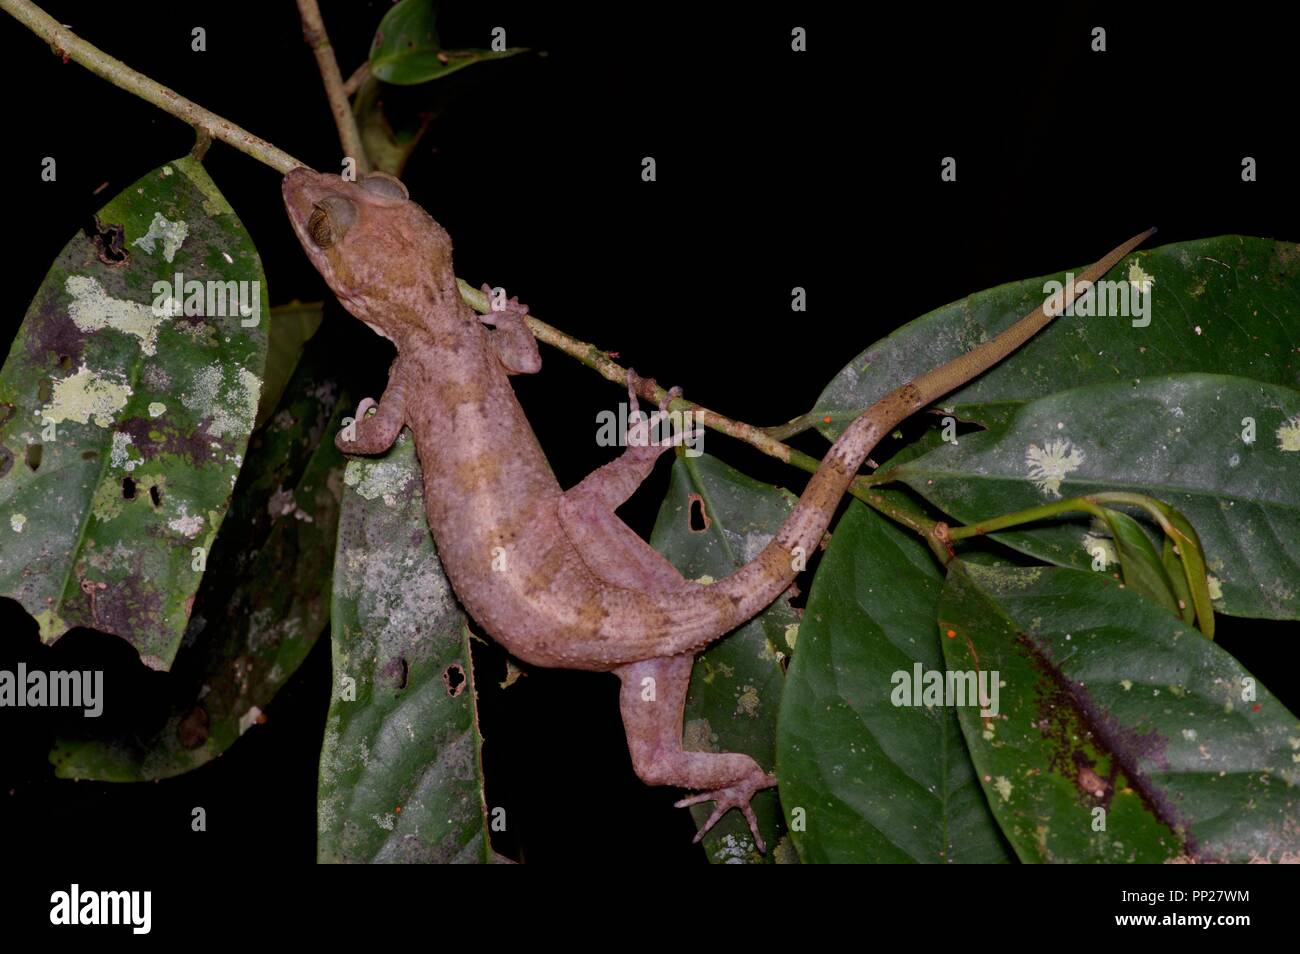 A Yoshi's Bent-toed Gecko (Cyrtodactylus yoshii) in vegetation in Danum Valley Conservation Area, Sabah, East Malaysia, Borneo Stock Photo